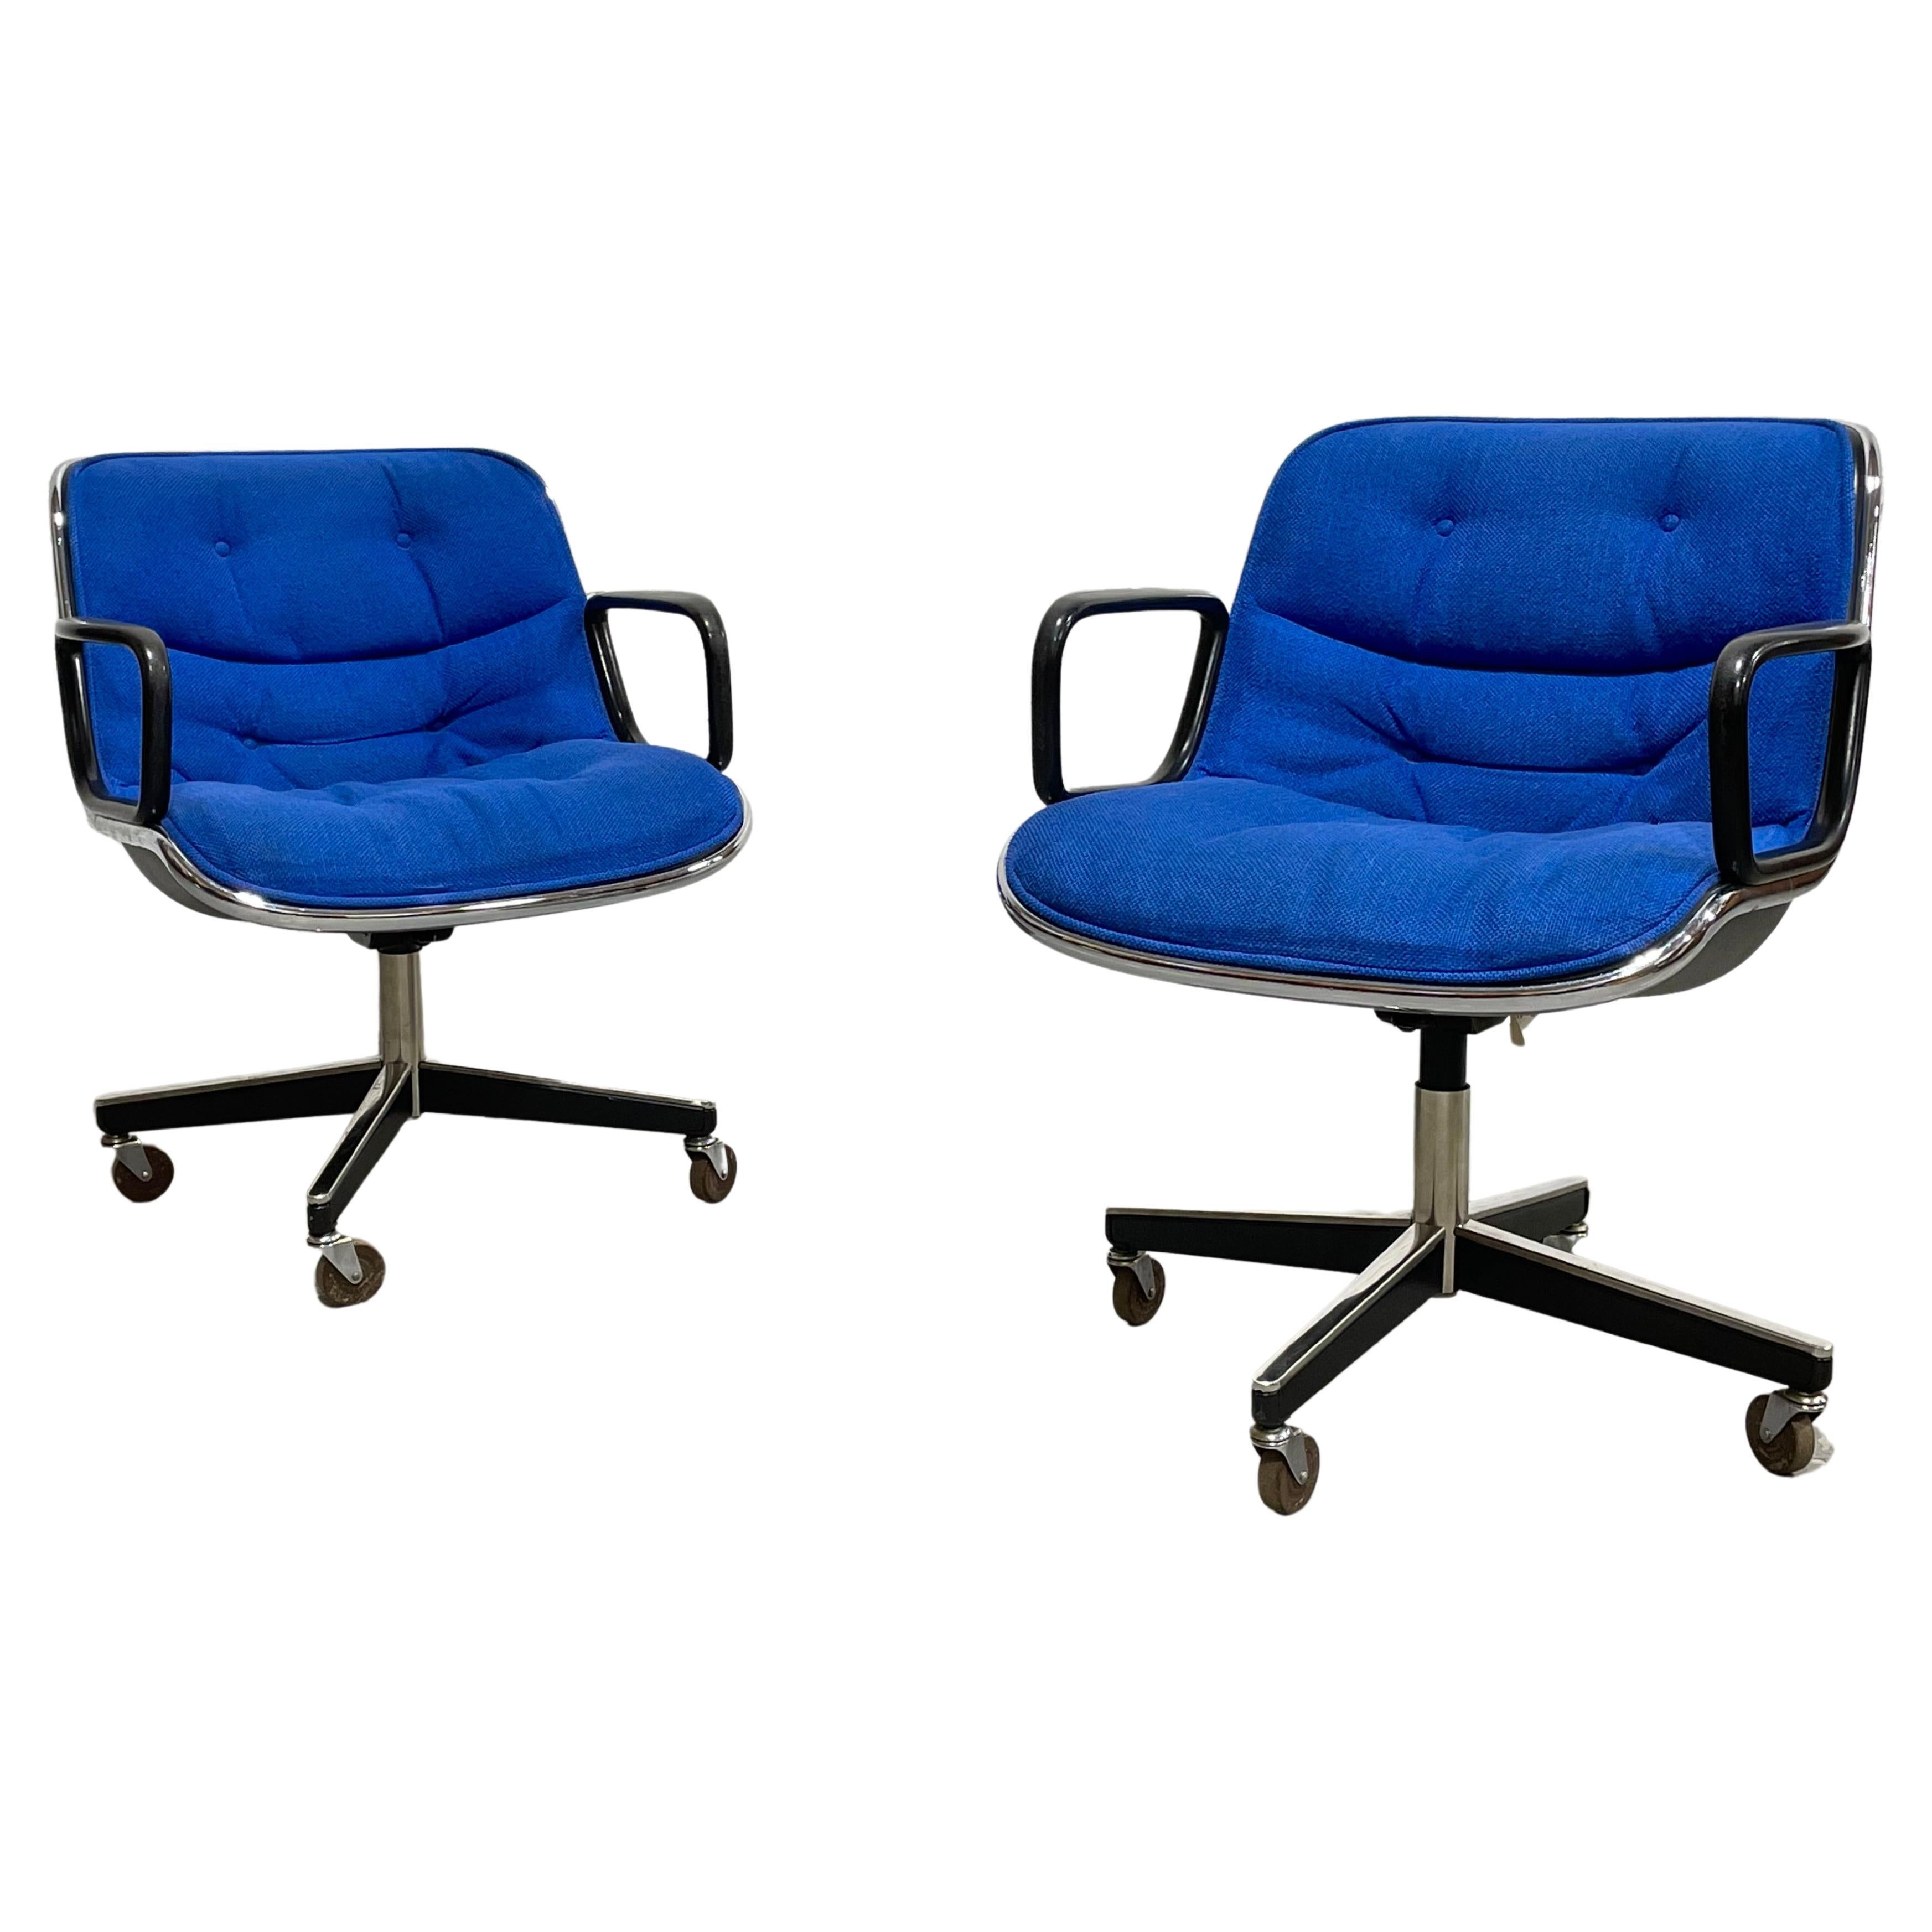 Royal Blue Mid-Century Modern Knoll Pollock Office Chair, Sold Individually